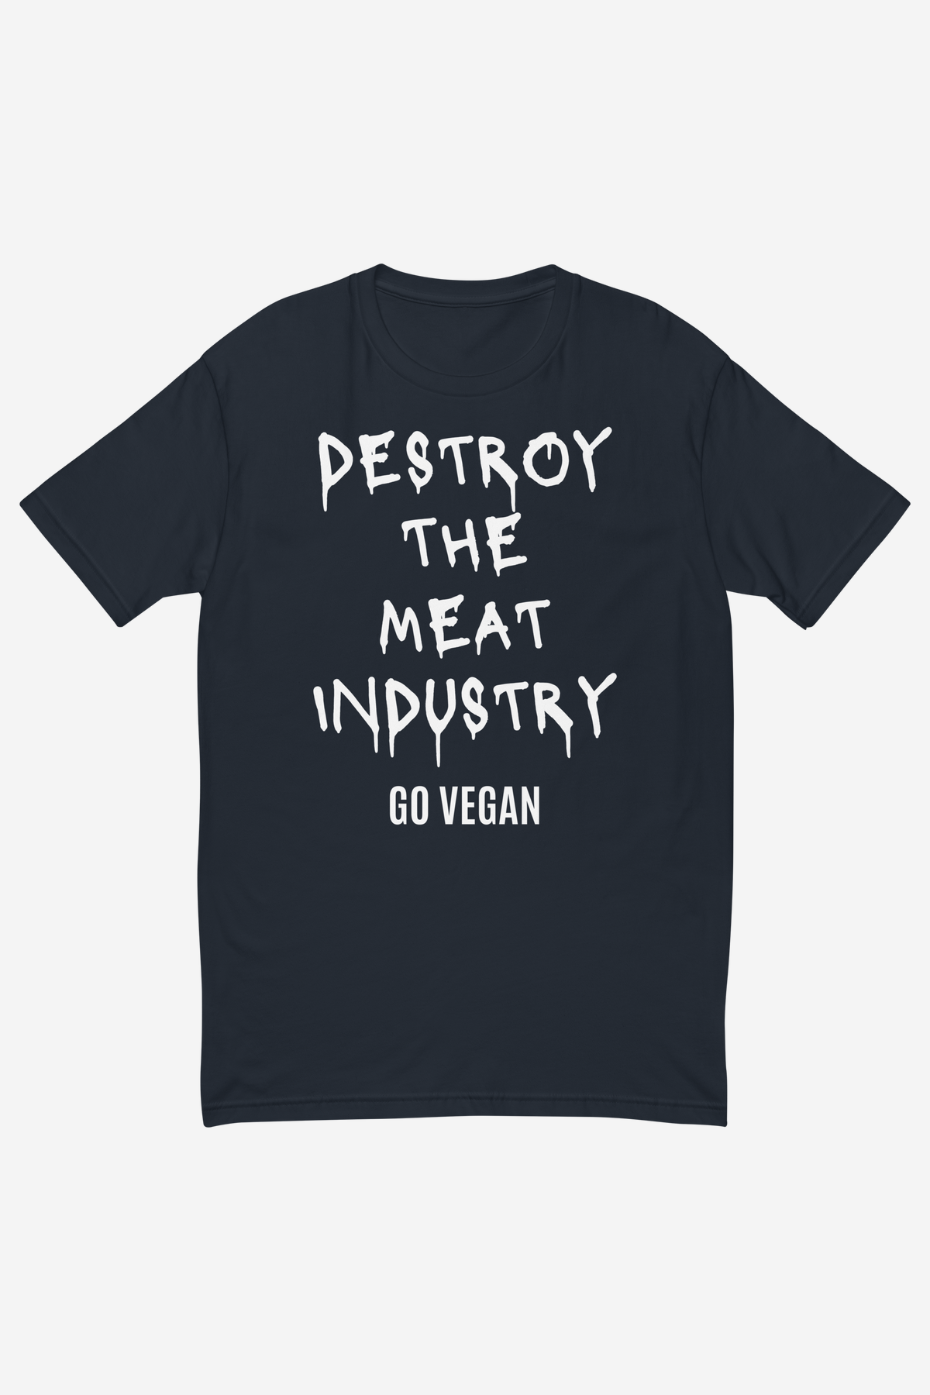 Destroy the Meat Industry Men's Fitted T-Shirt